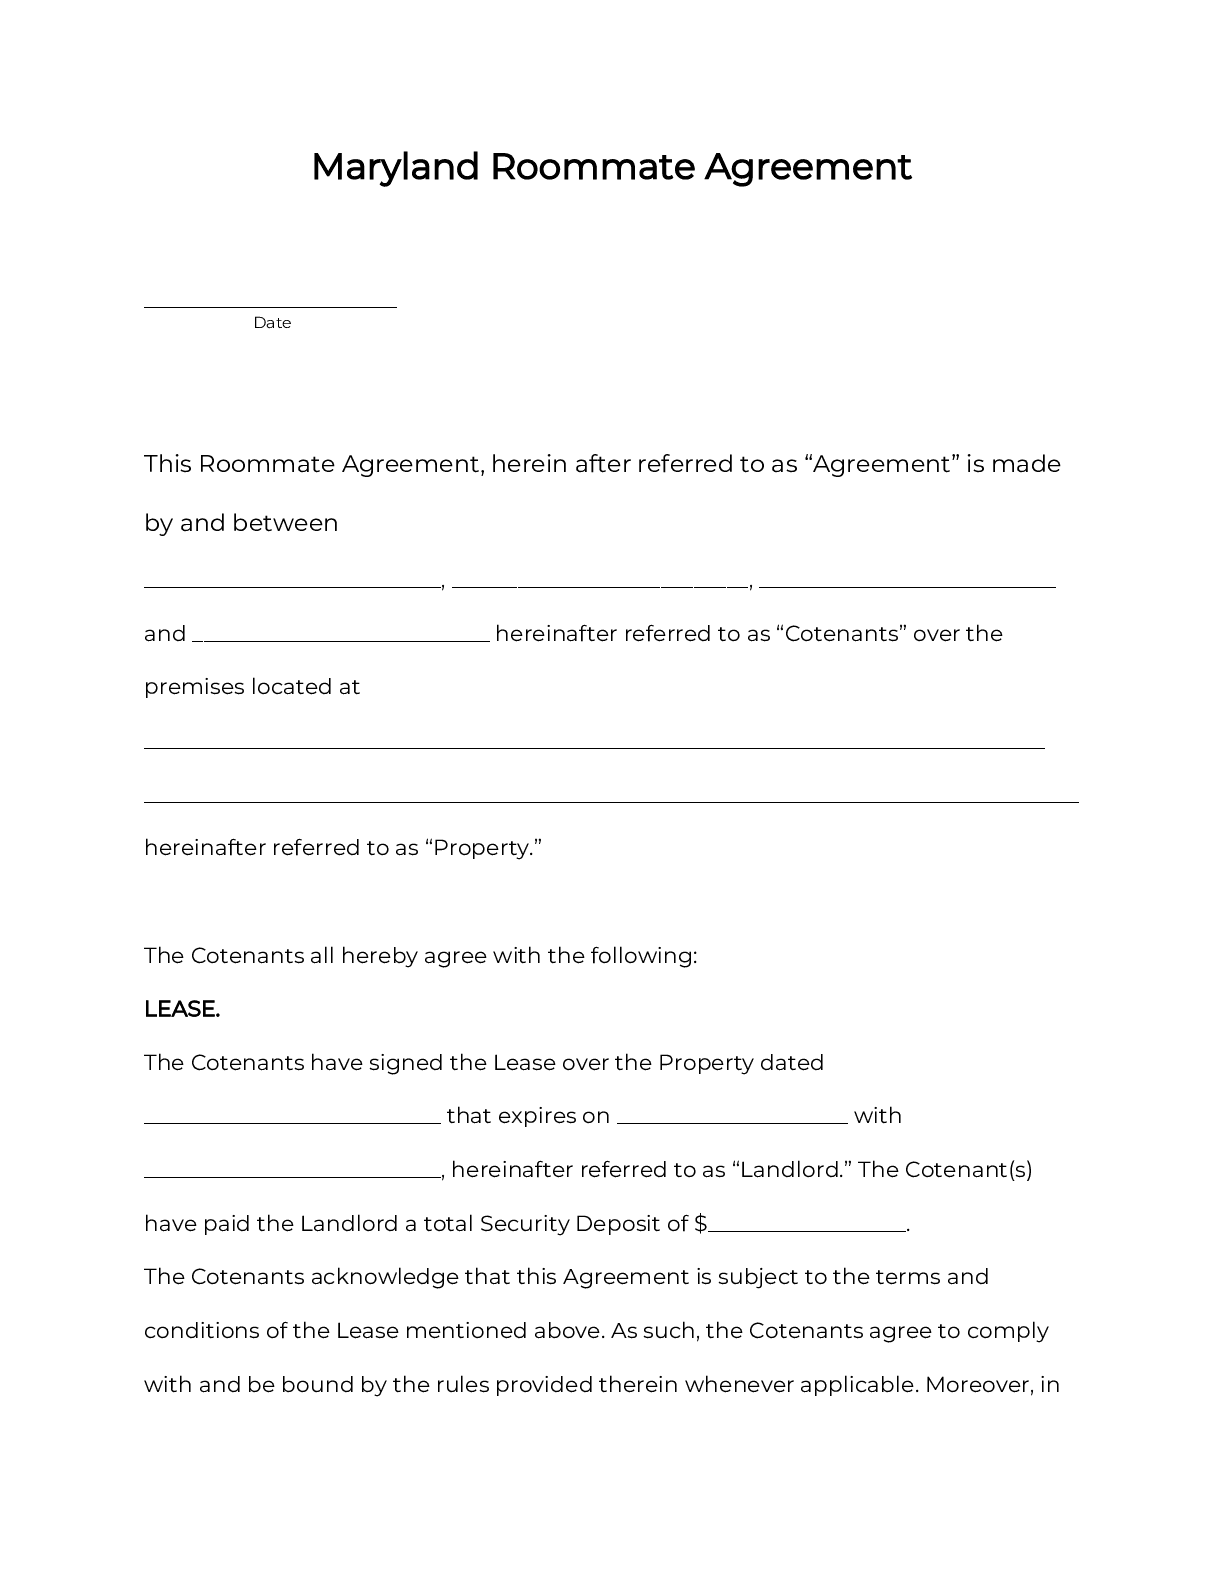 OFFICIAL Maryland Room Rental Agreement: Roommate Form [5]